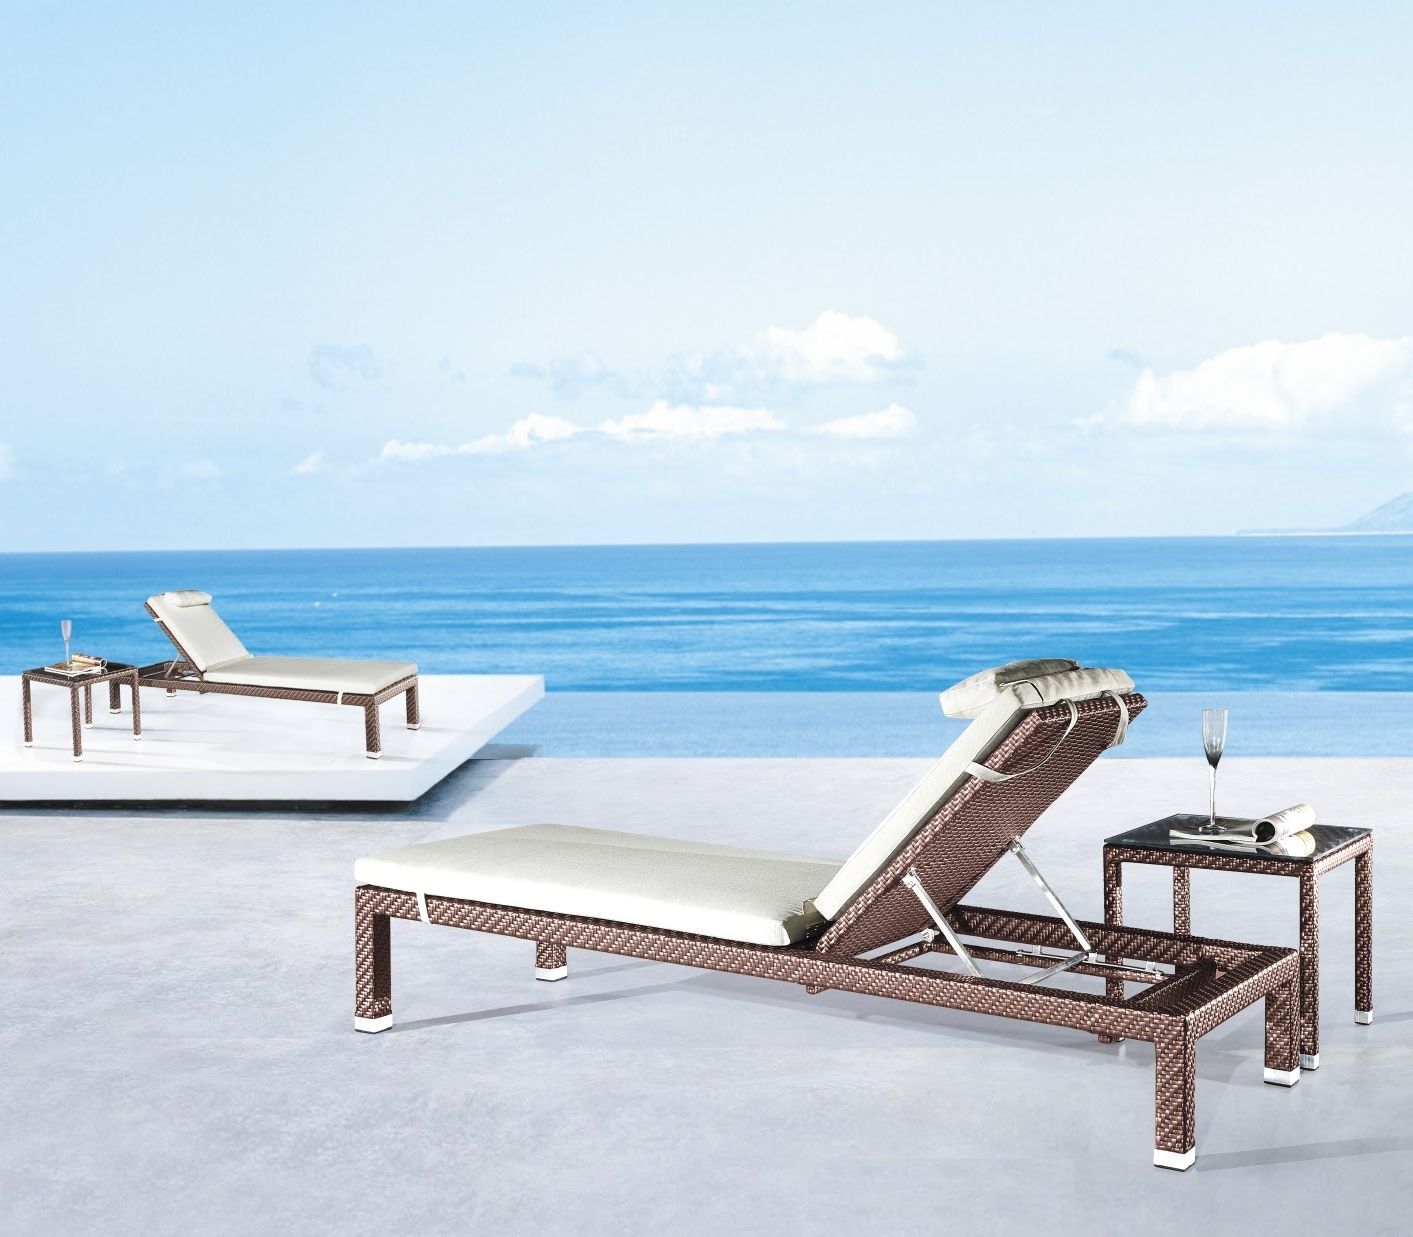 2018 Blue Outdoor Chaise Lounge Chairs Regarding Outdoor : Target Lounge Chairs Commercial Chaise Lounge Chairs (View 13 of 15)